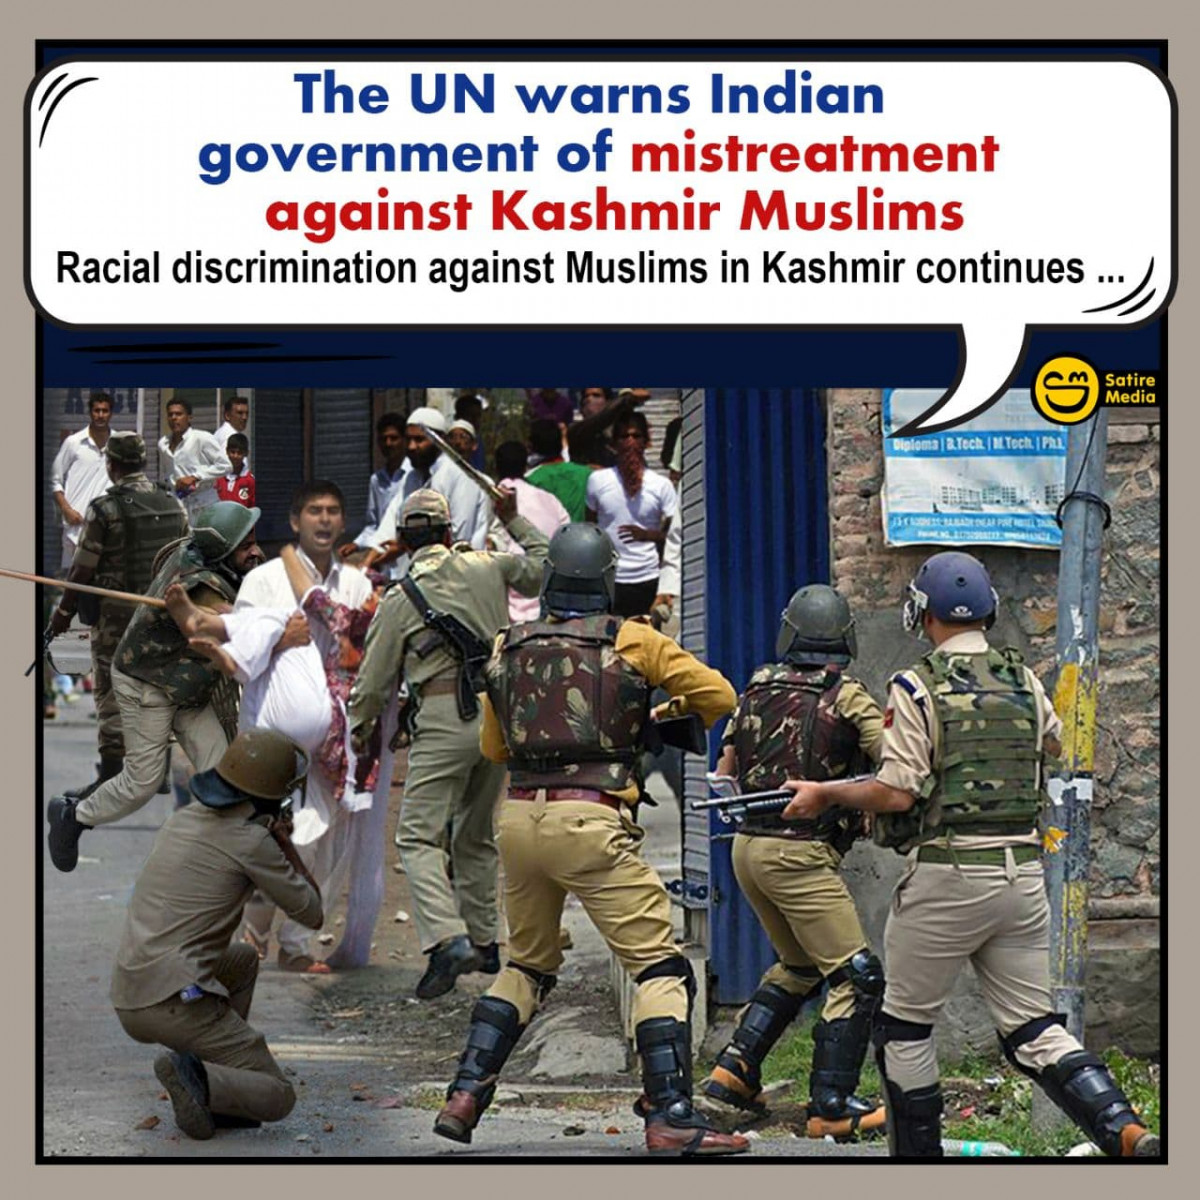 The UN warns Indian government of mistreatment against Kashmir Muslims